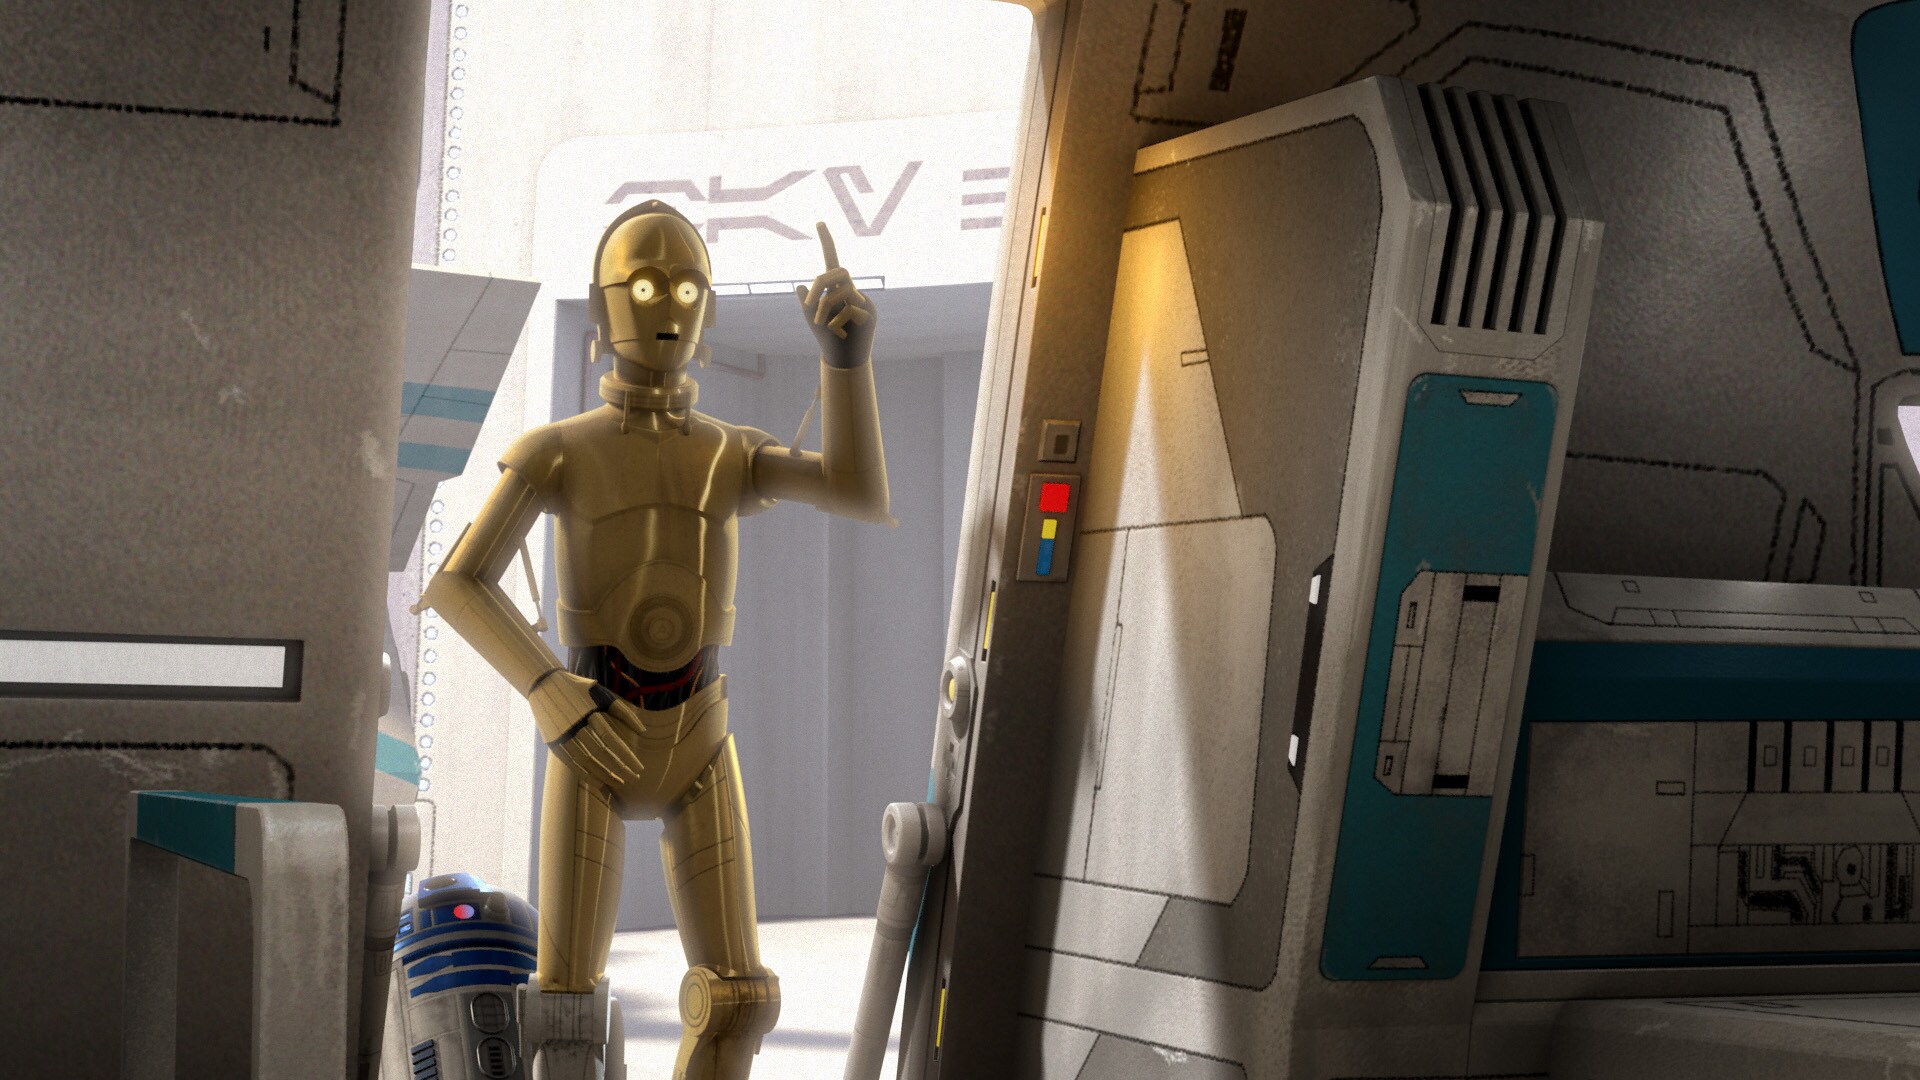 ...a droid named C-3PO. He boards the shuttle with his counterpart, an astromech called R2-D2.